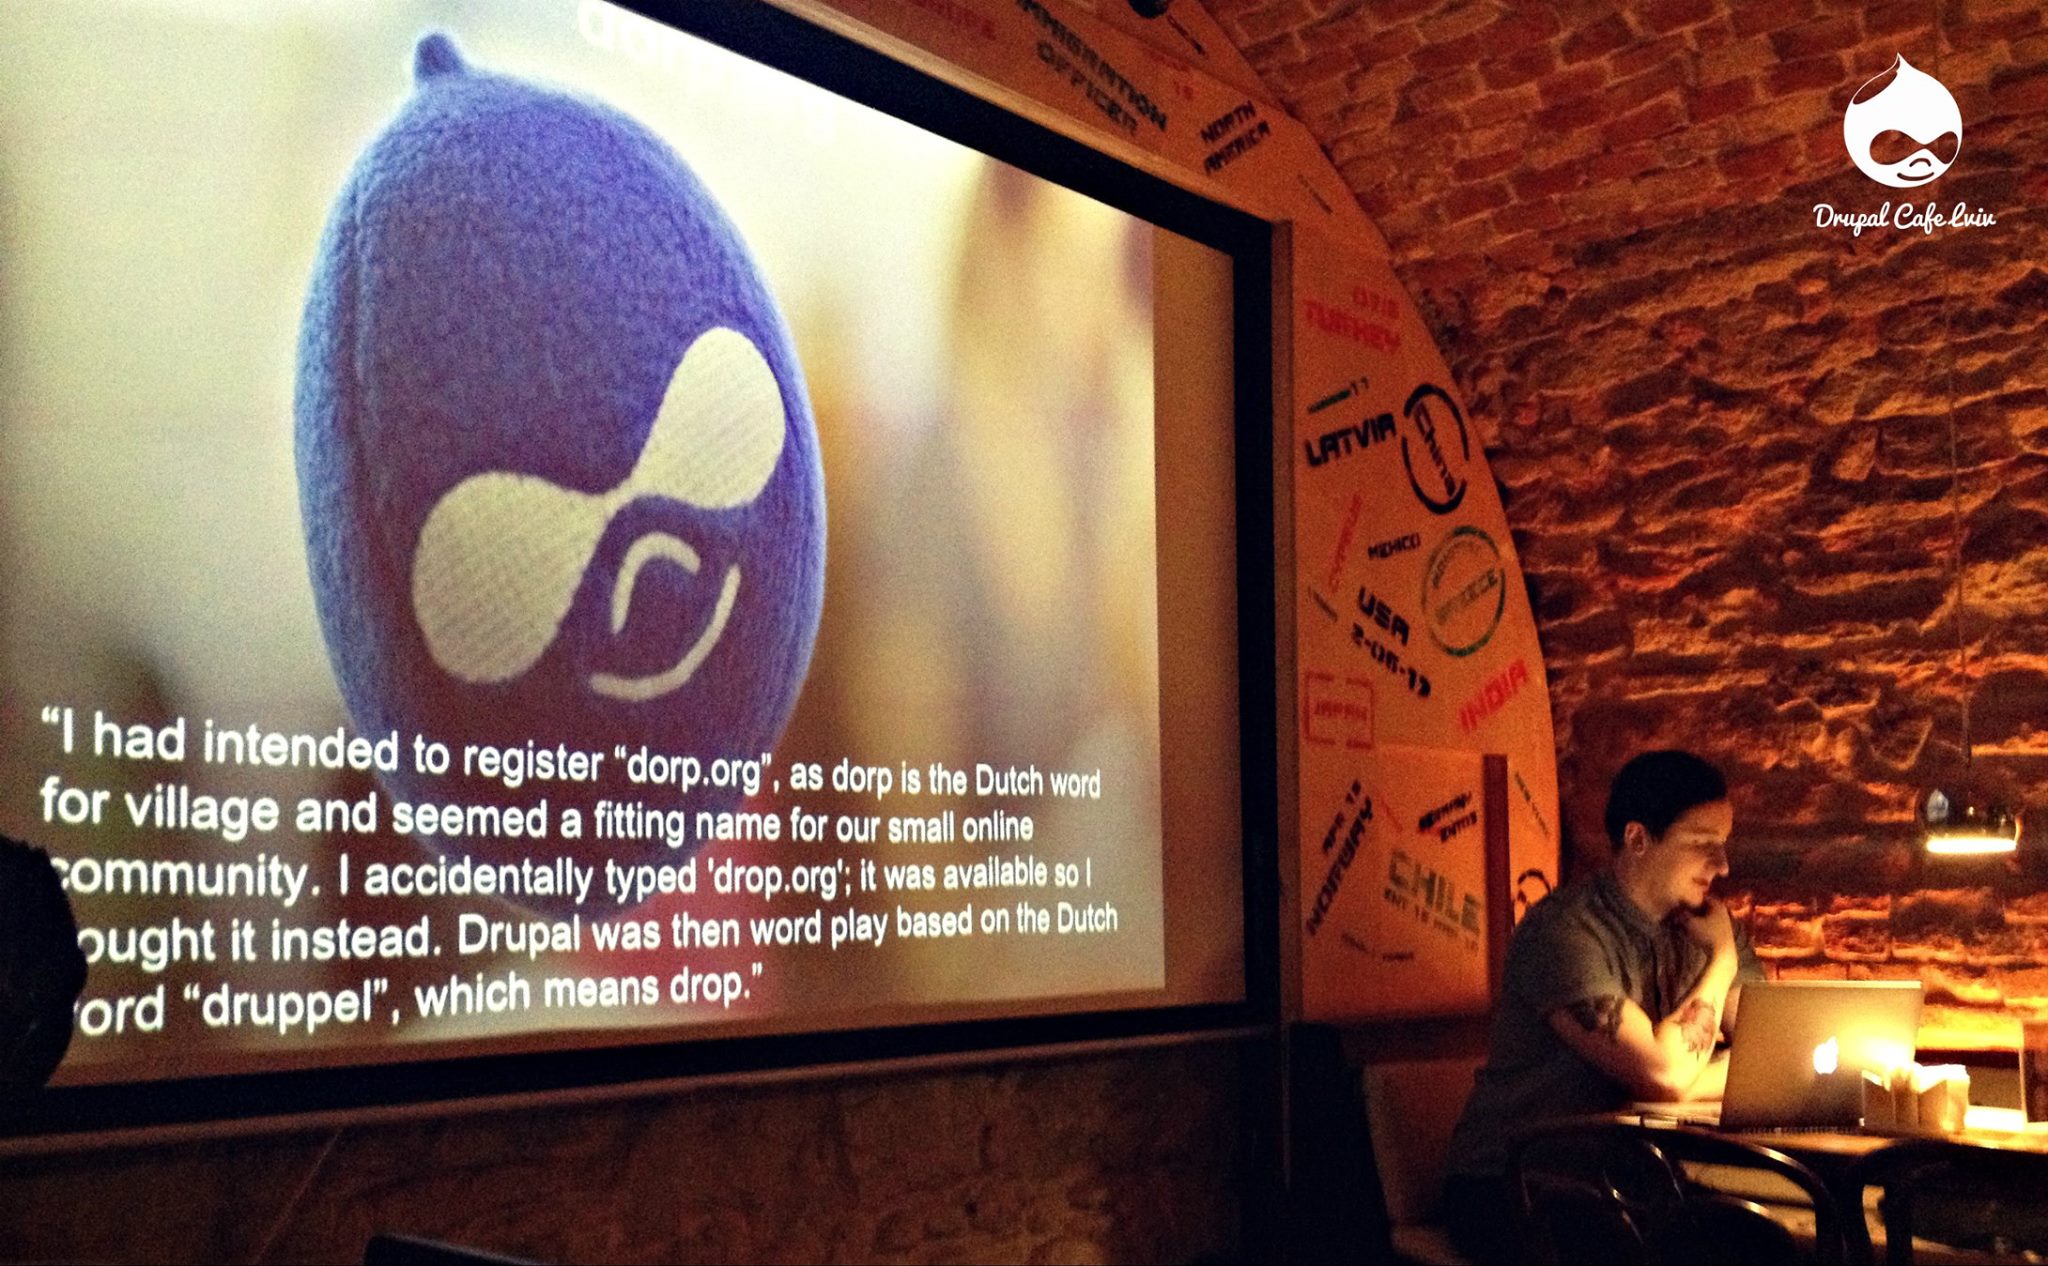 Drupal Cafe Lviv: Let’s Have a Throwback and Recall How It Was - Lemberg Solutions Blog